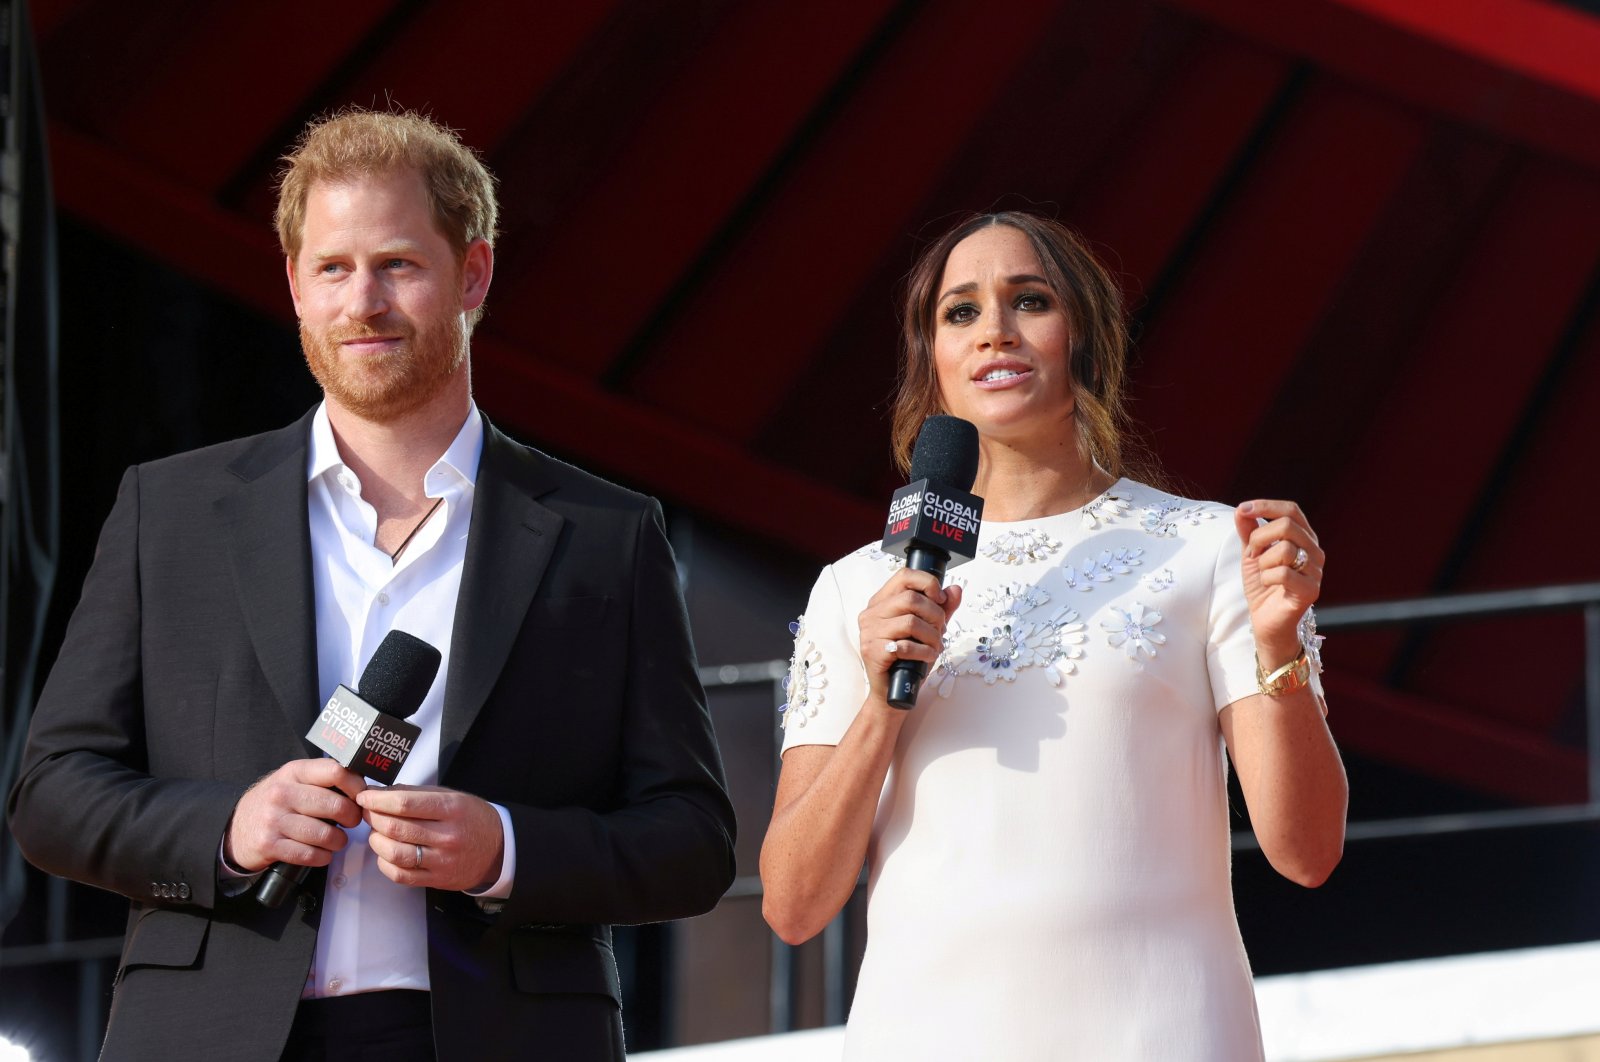 Britain&#039;s Prince Harry and Meghan Markle speak at the 2021 Global Citizen Live concert at Central Park in New York, U.S., Sept. 25, 2021. (Reuters Photo)